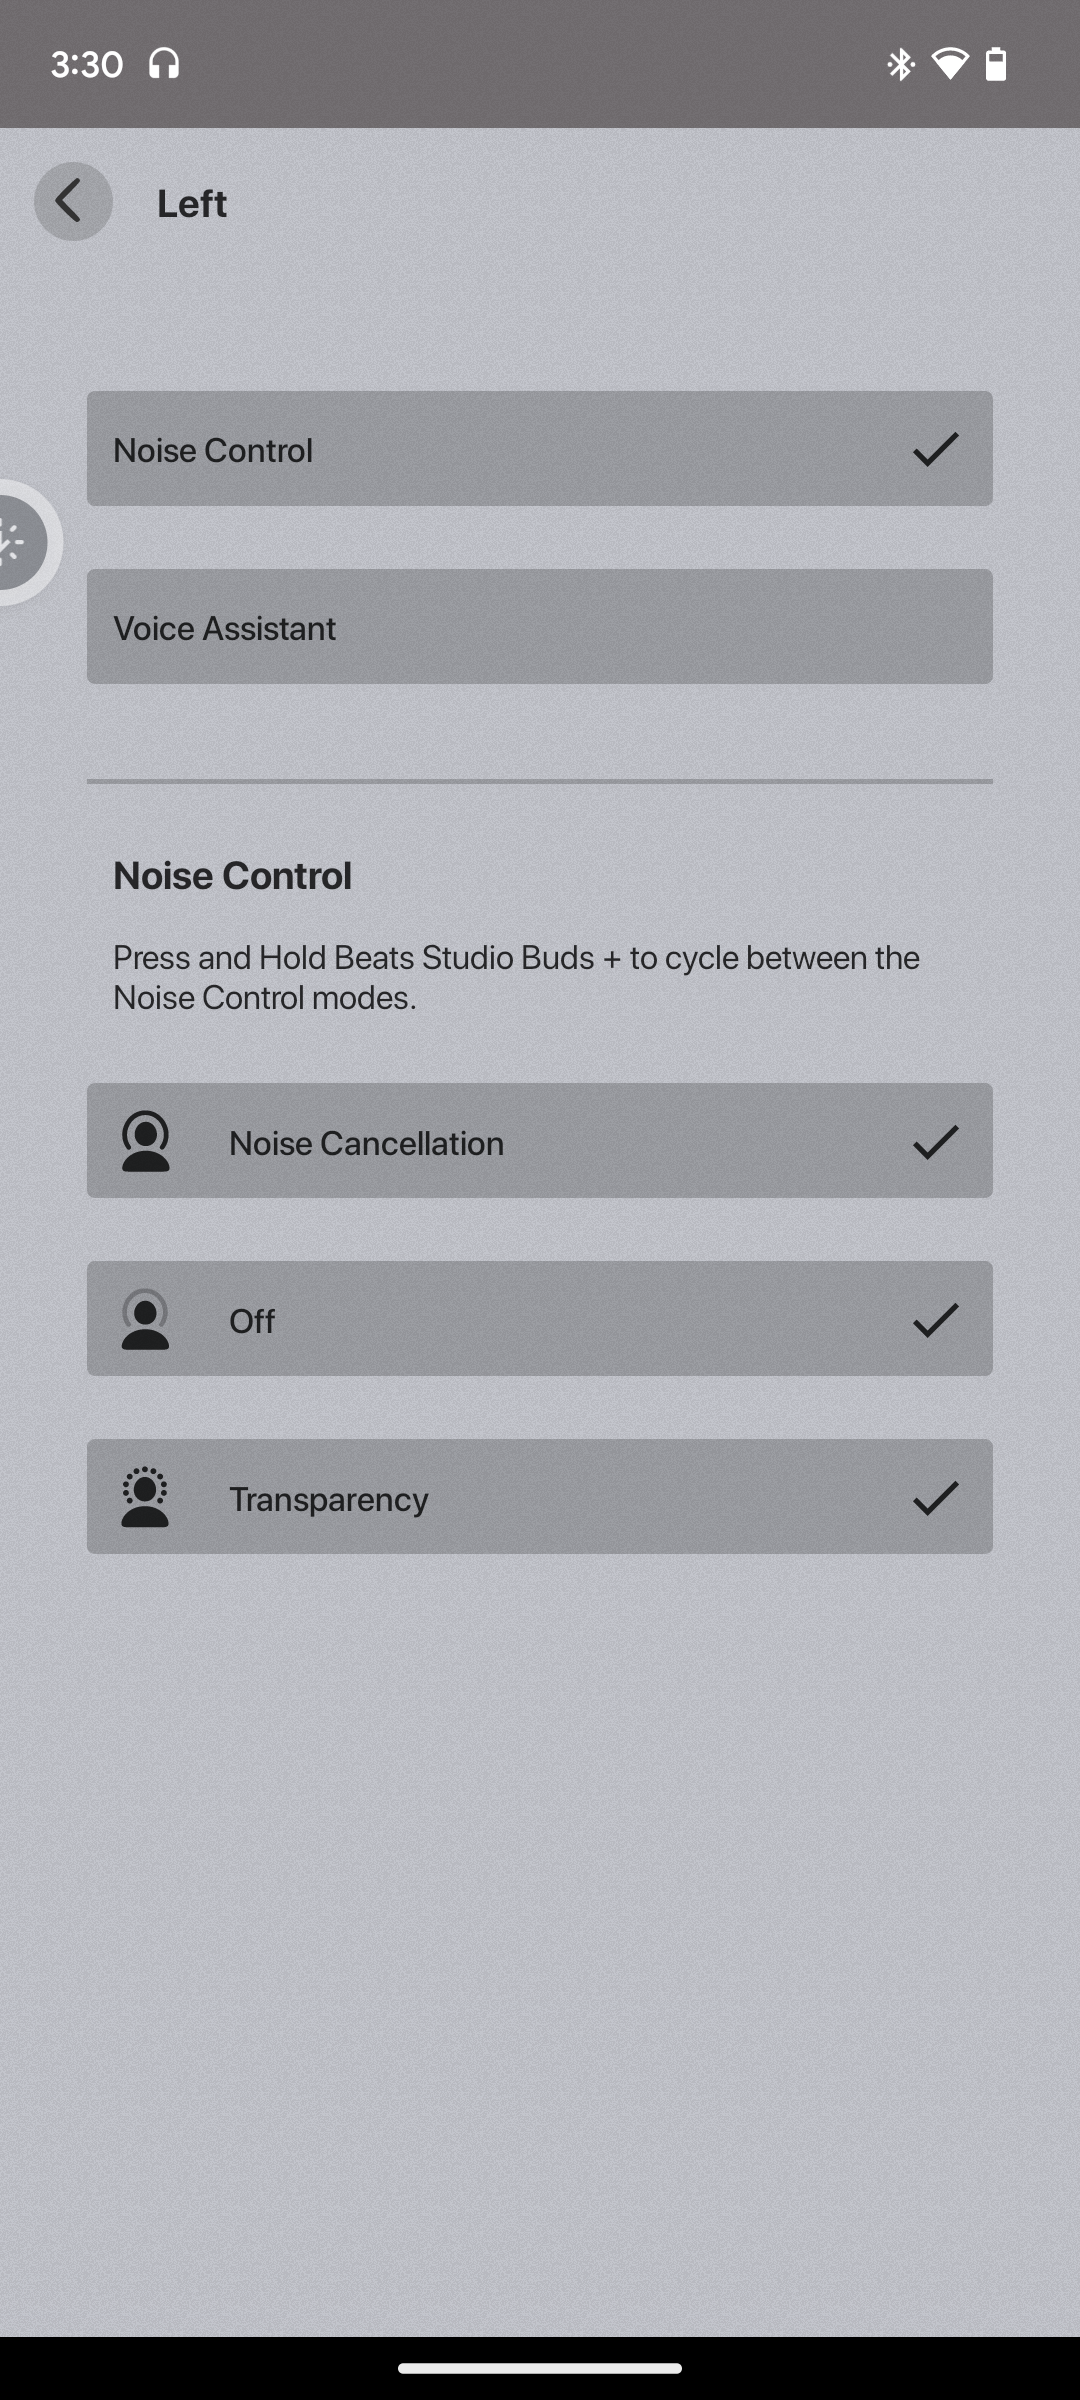 The Beats app on Android noise control options.